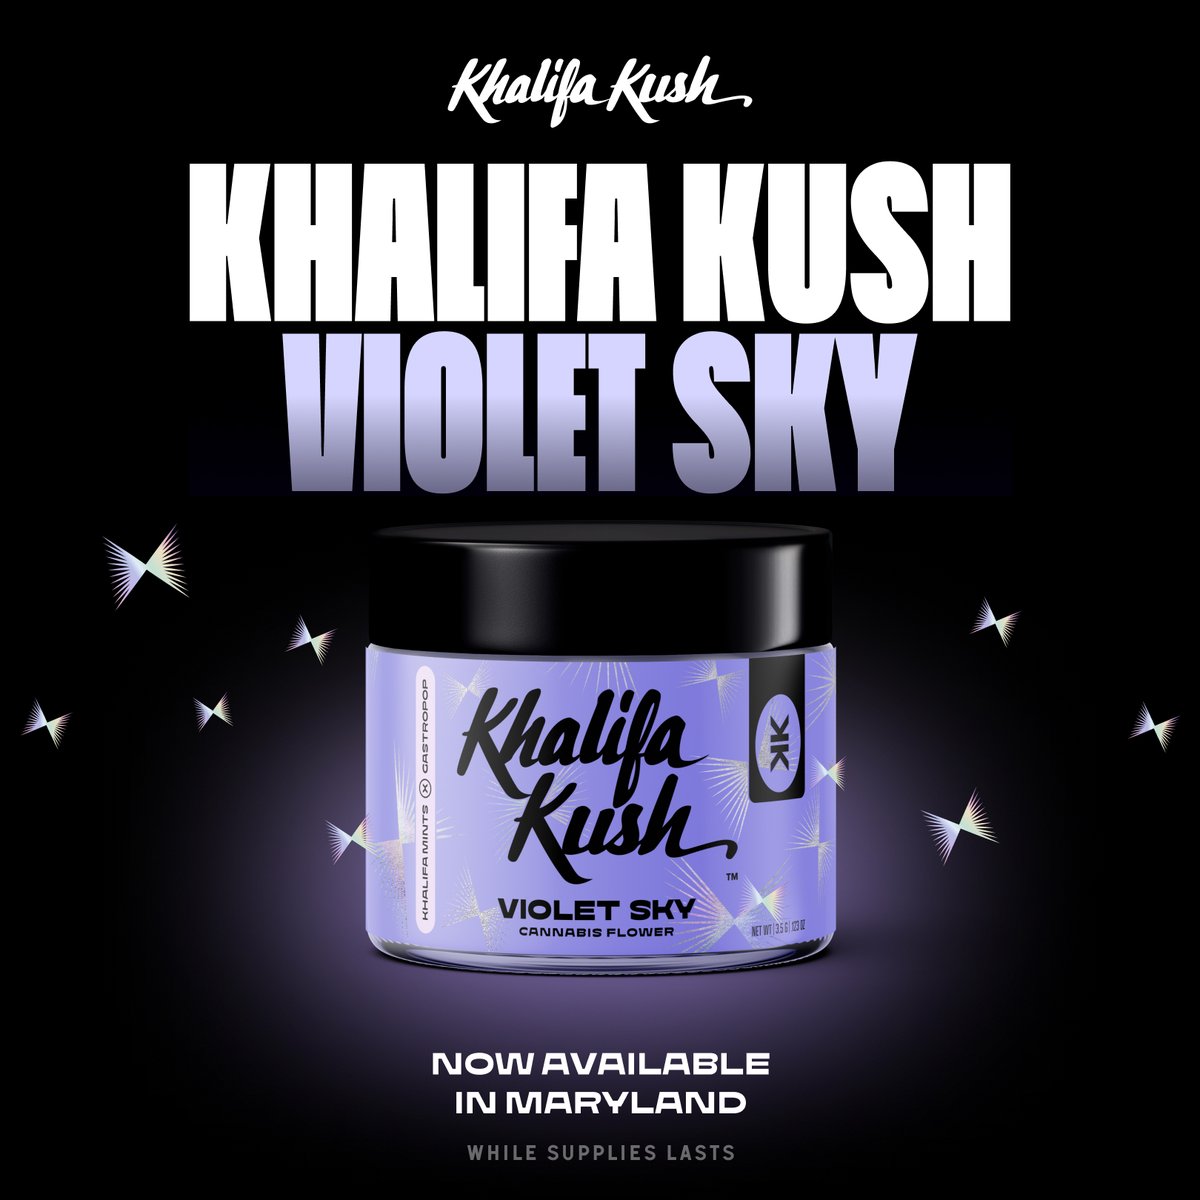 Maryland's skies just got a little more purple! 🌌 Introducing Khalifa Kush Violet Sky - in your area. Get ready to elevate your experience! 🌿 @khalifakush